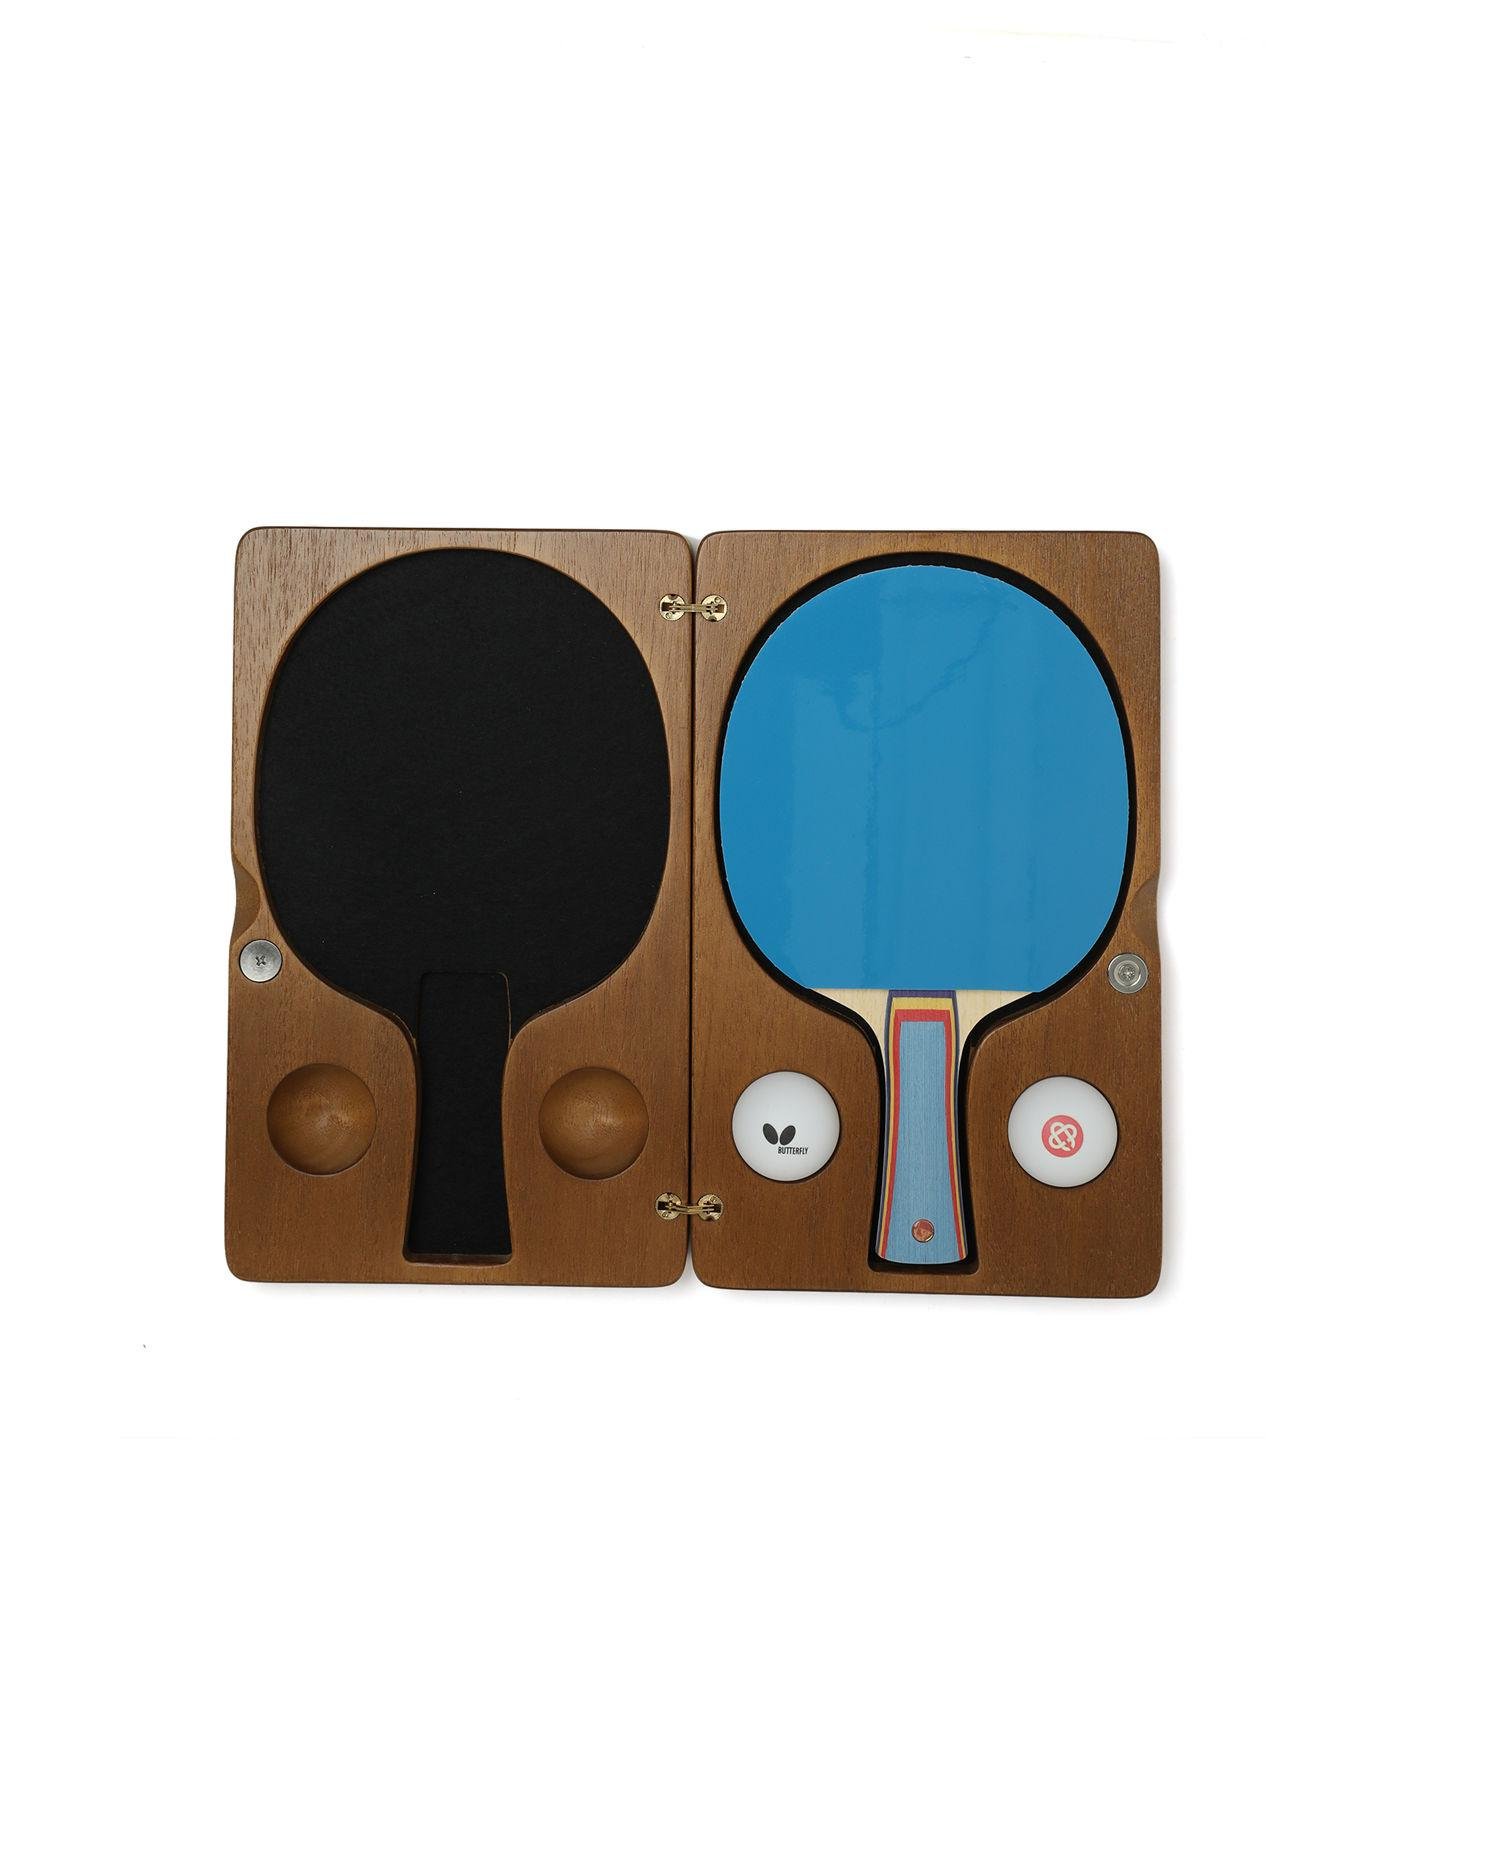 X Butterfly Table Tennis bat and ball set by CASABLANCA